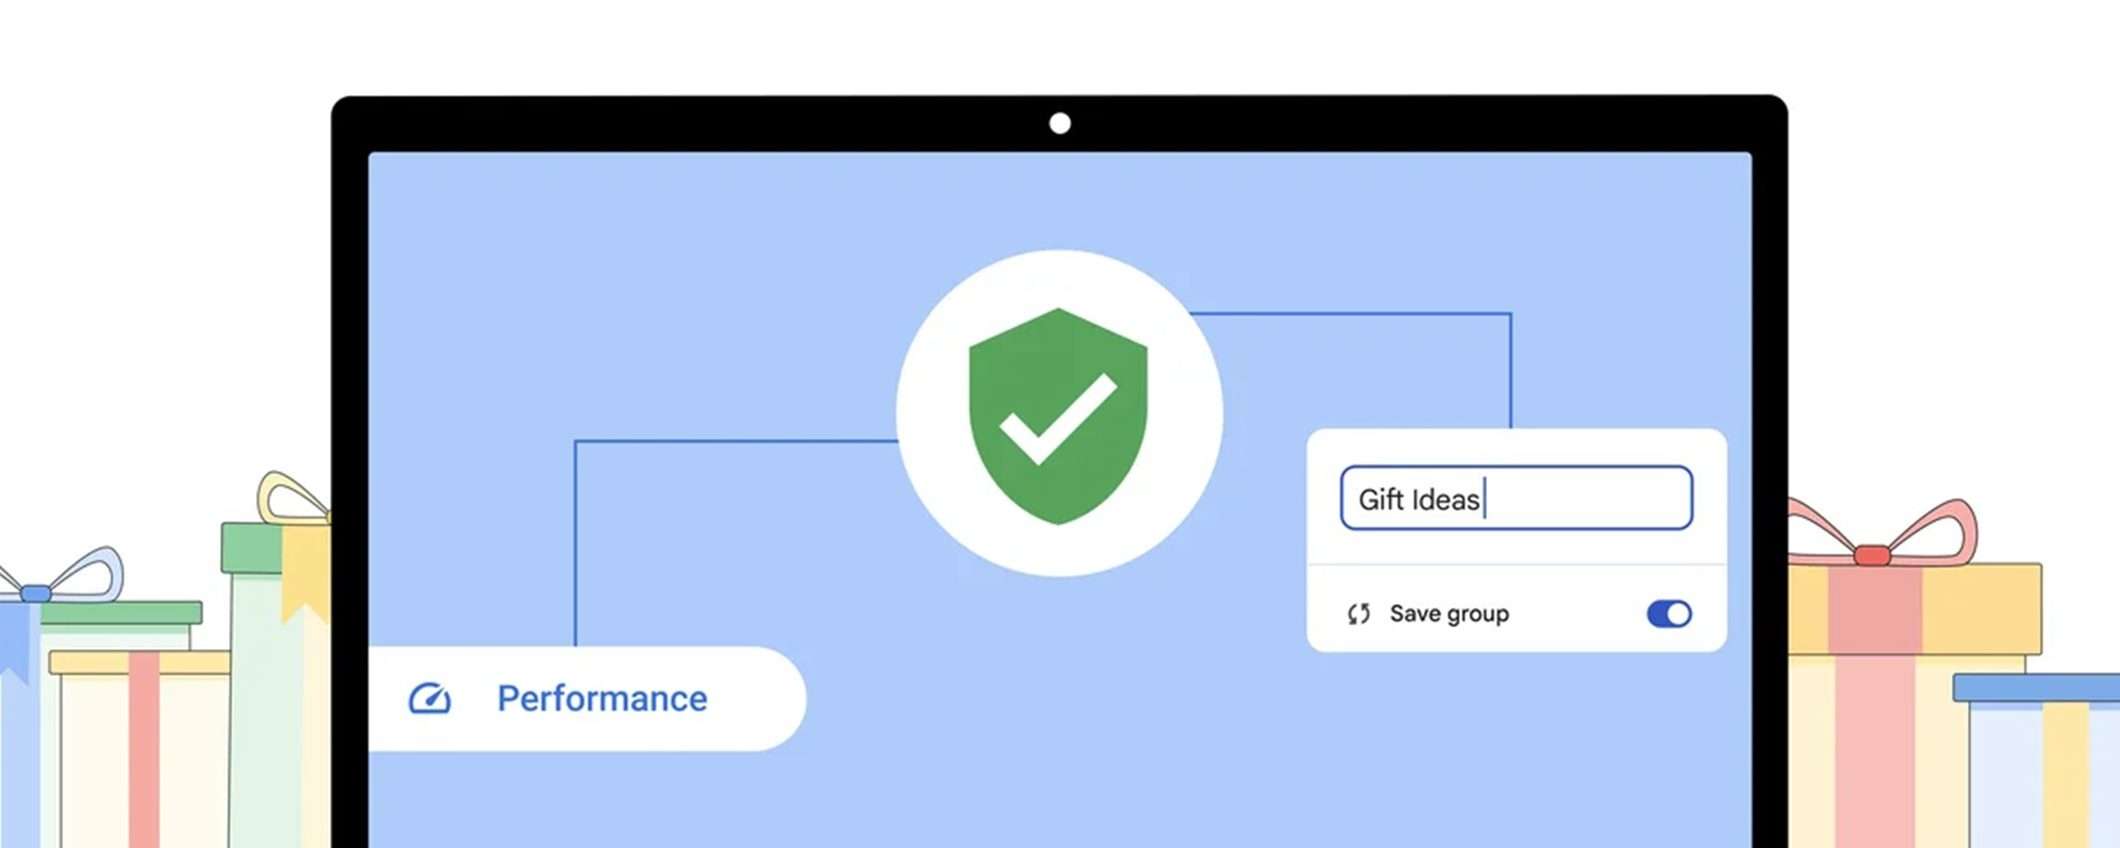 Safety check di Chrome scansiona le password compromesse